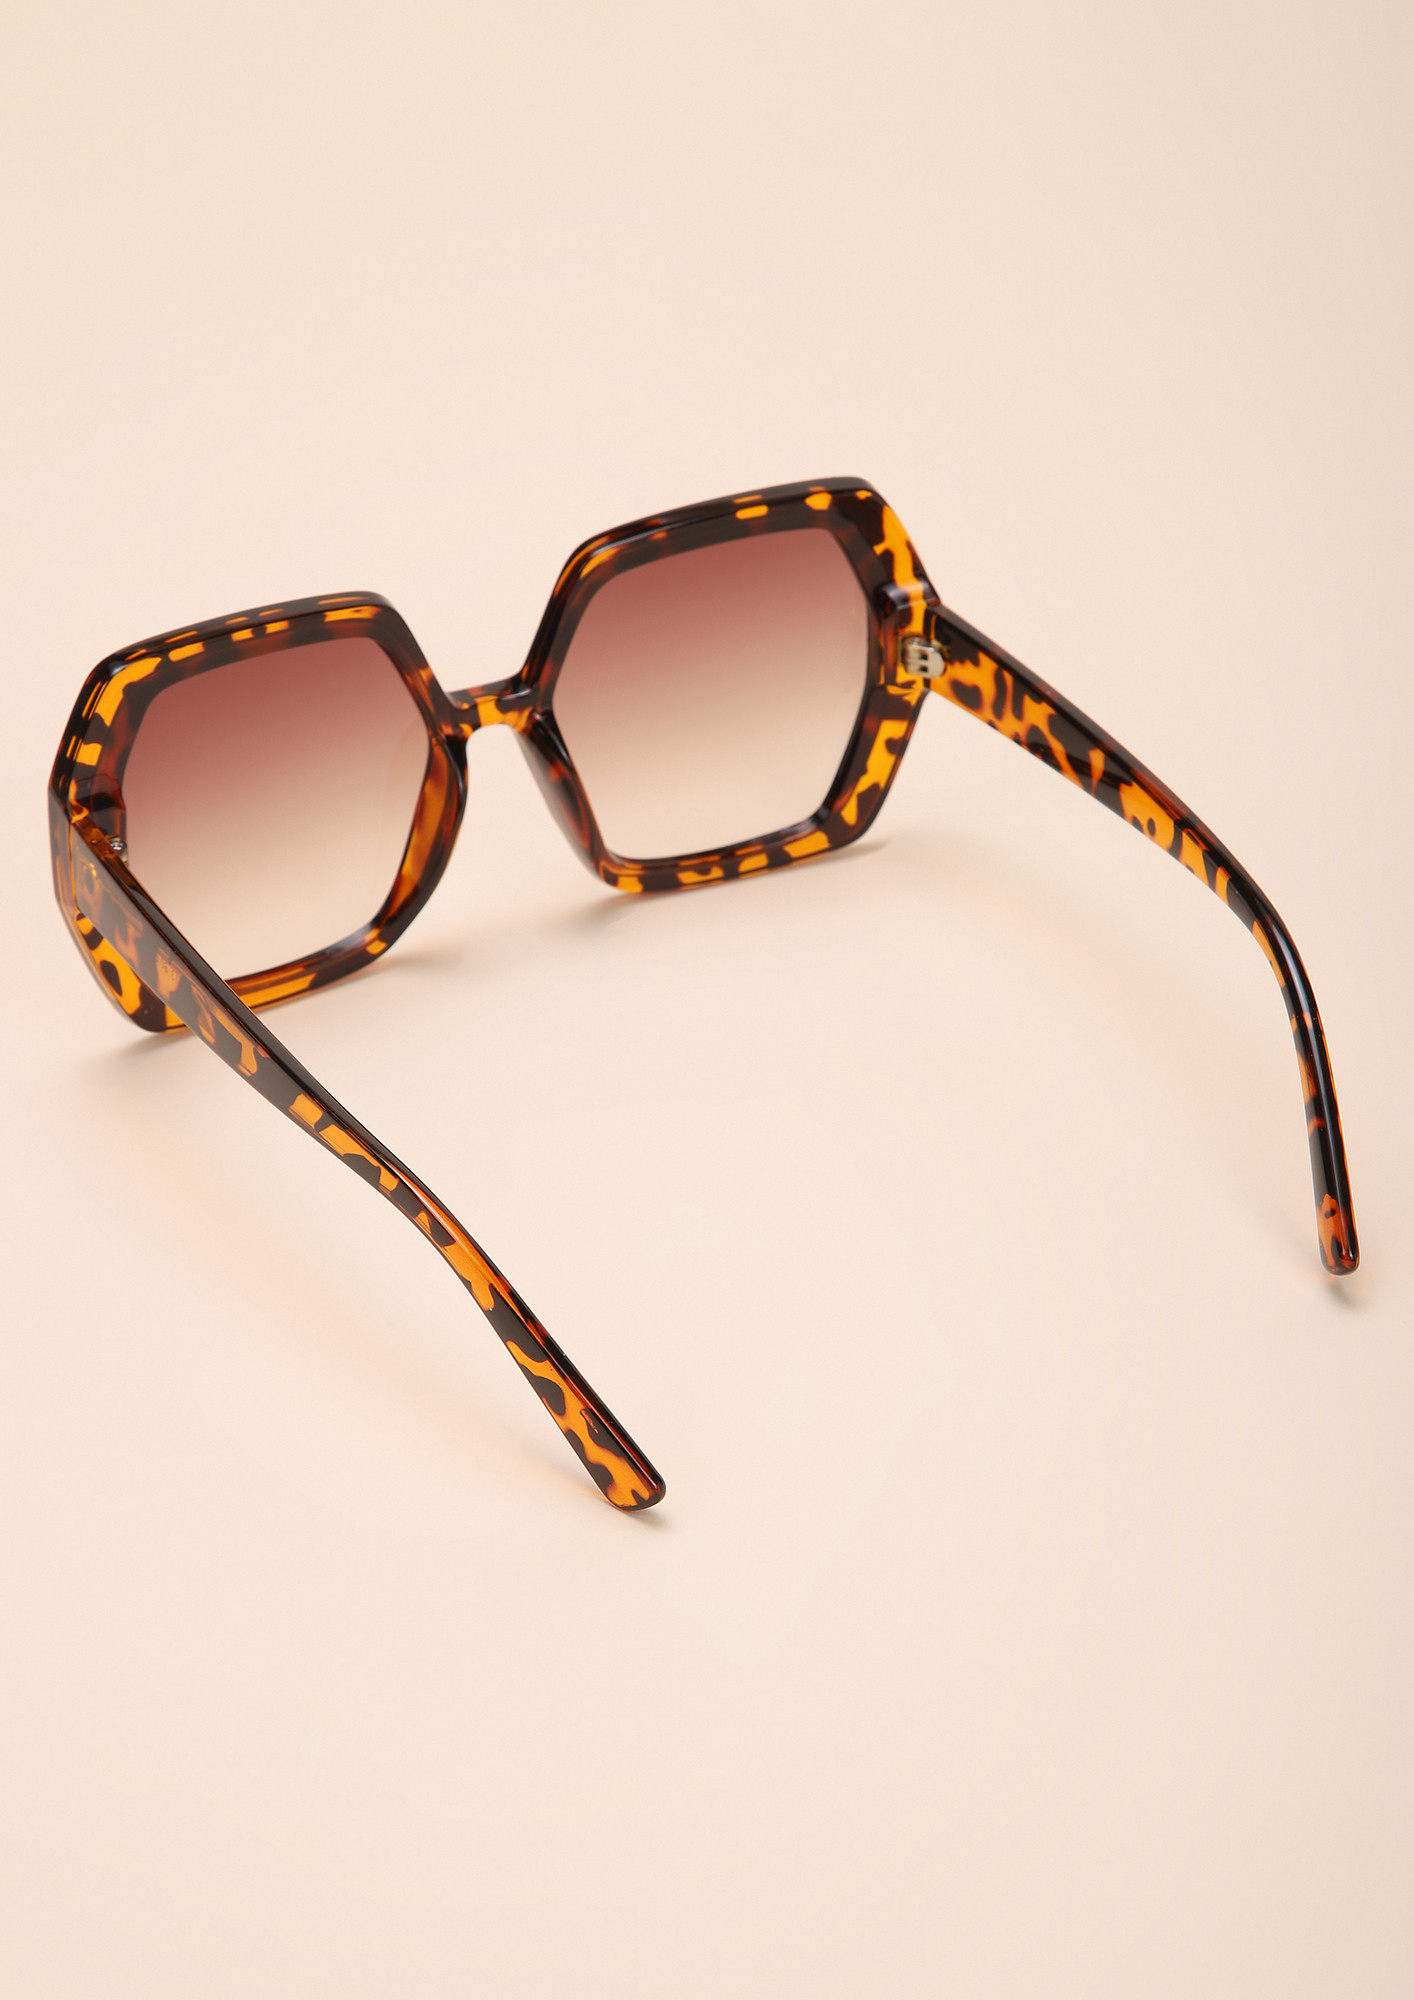 PURR-FECTLY NORMAL AMBER SQUARE FRAME SUNGLASSES